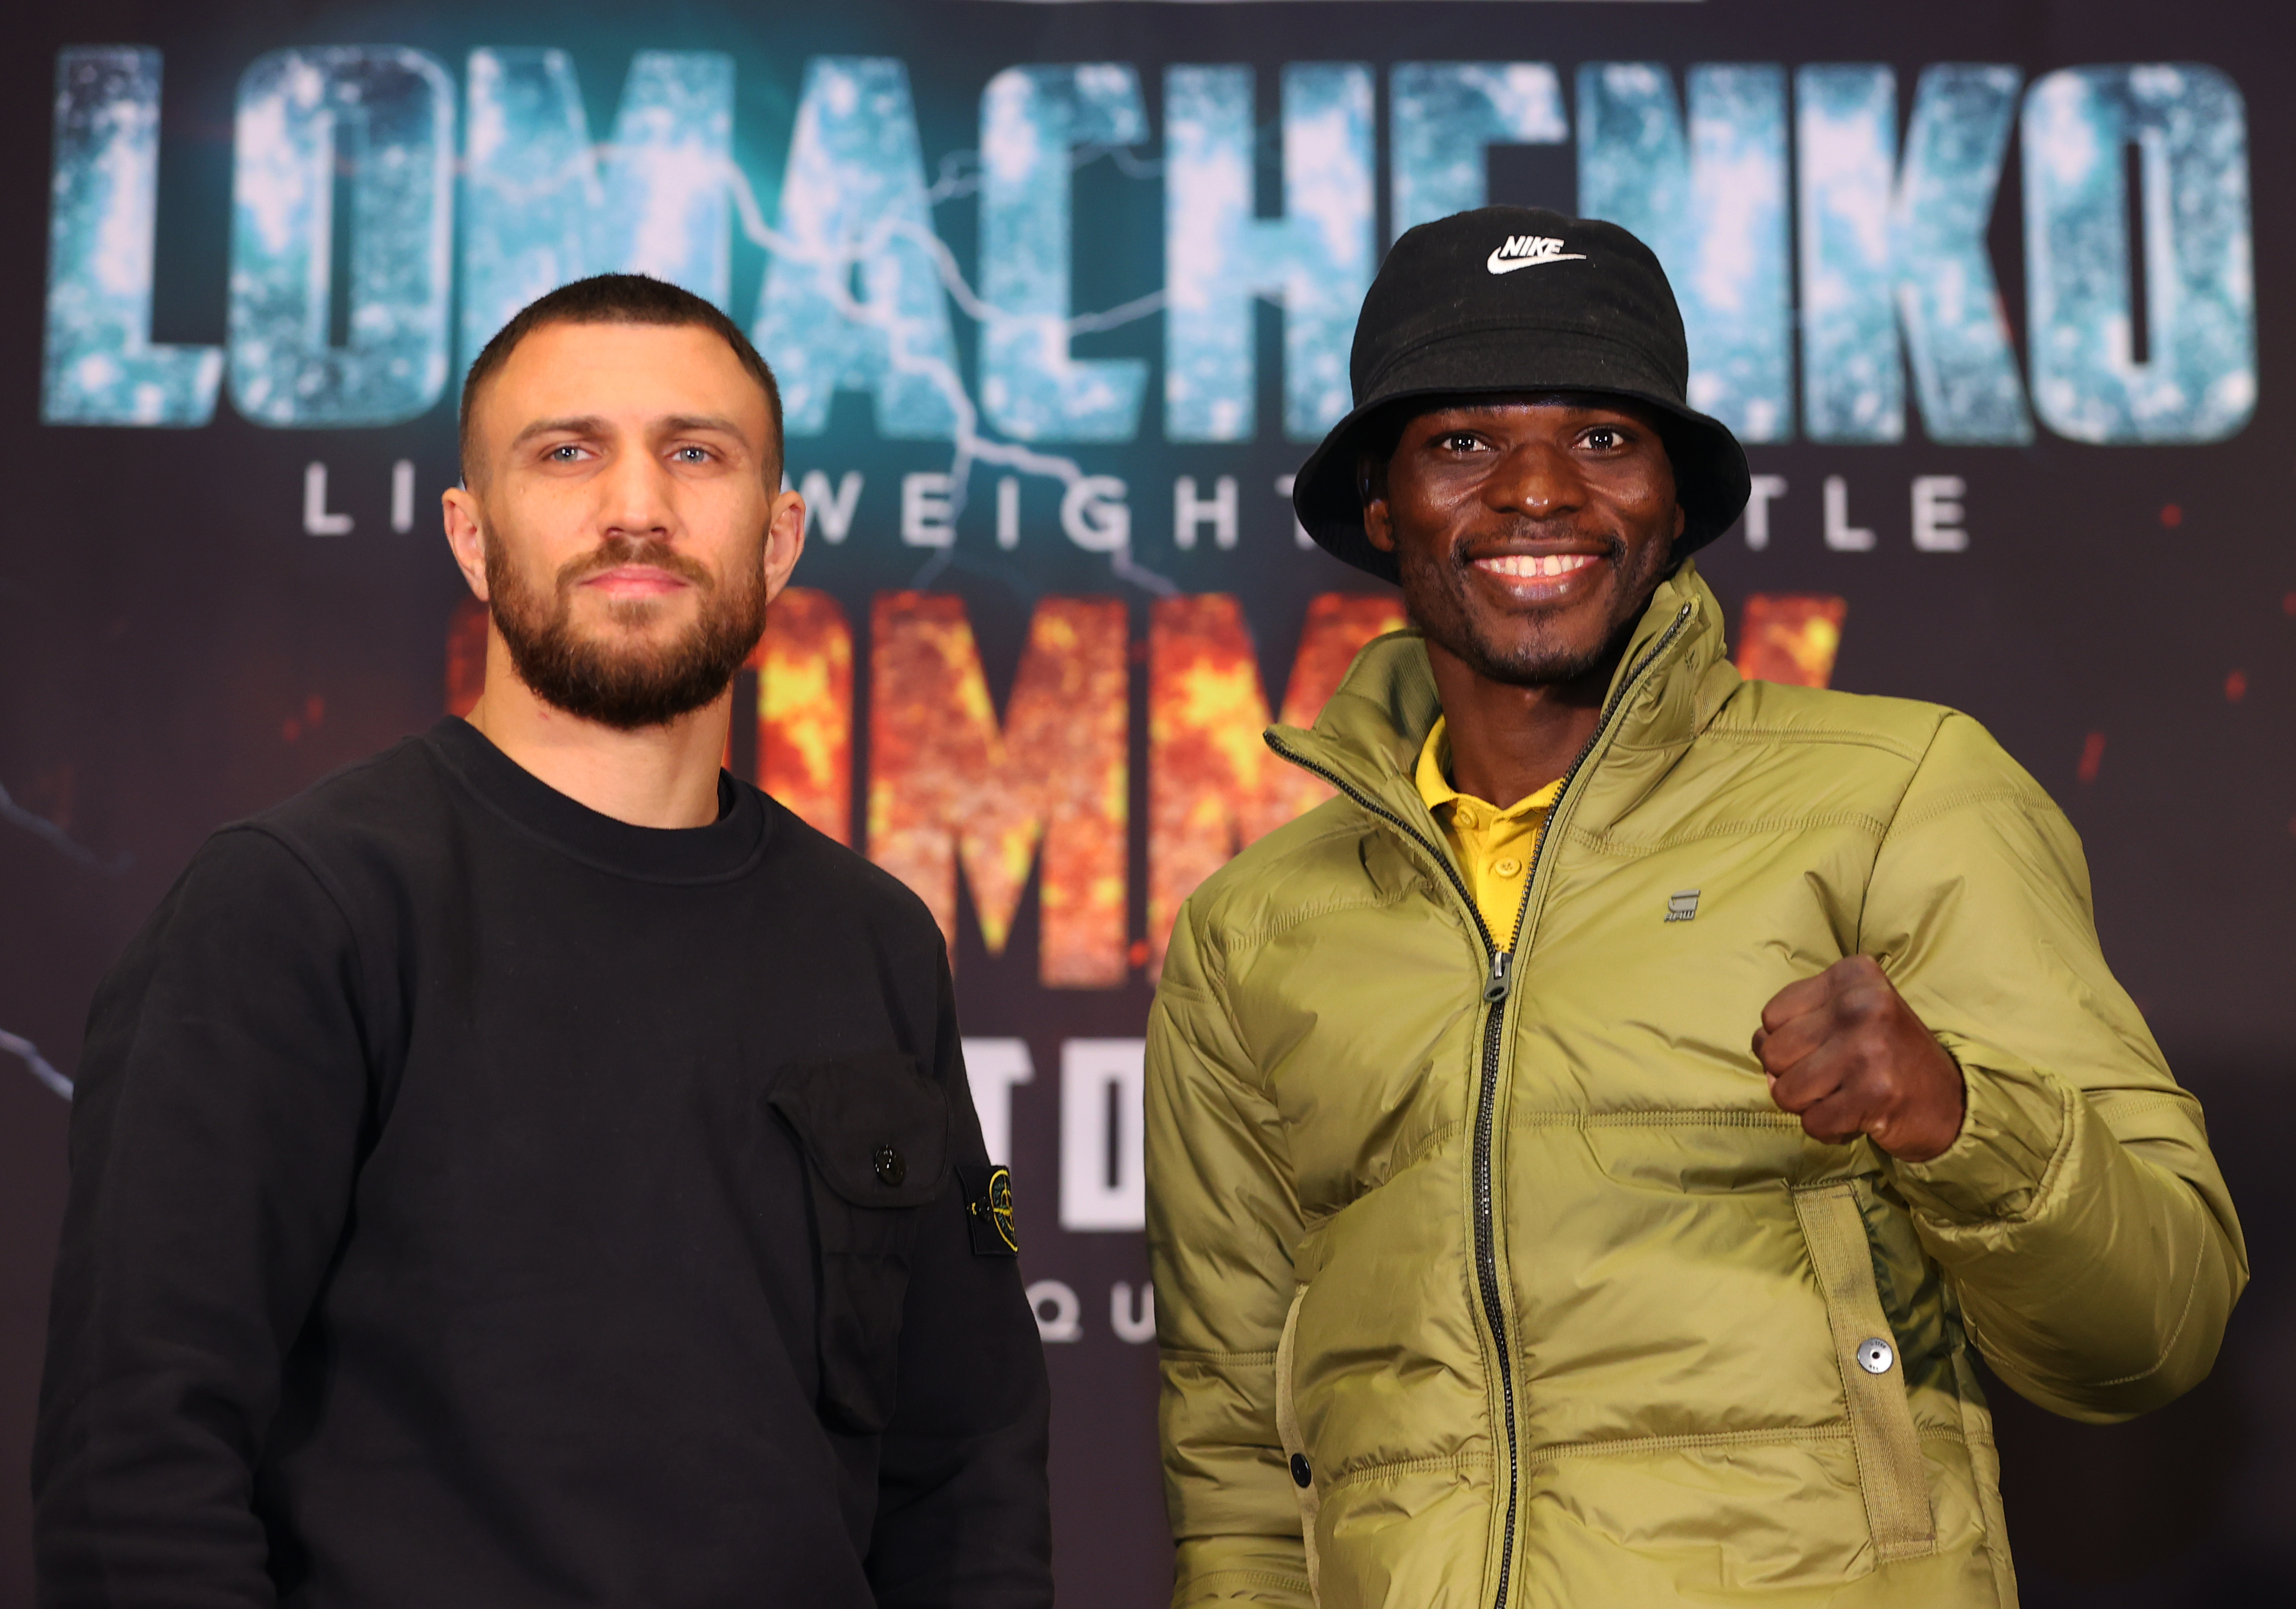 Vasiliy Lomachenko and Richard Commey keep the lightweight division rolling on Saturday